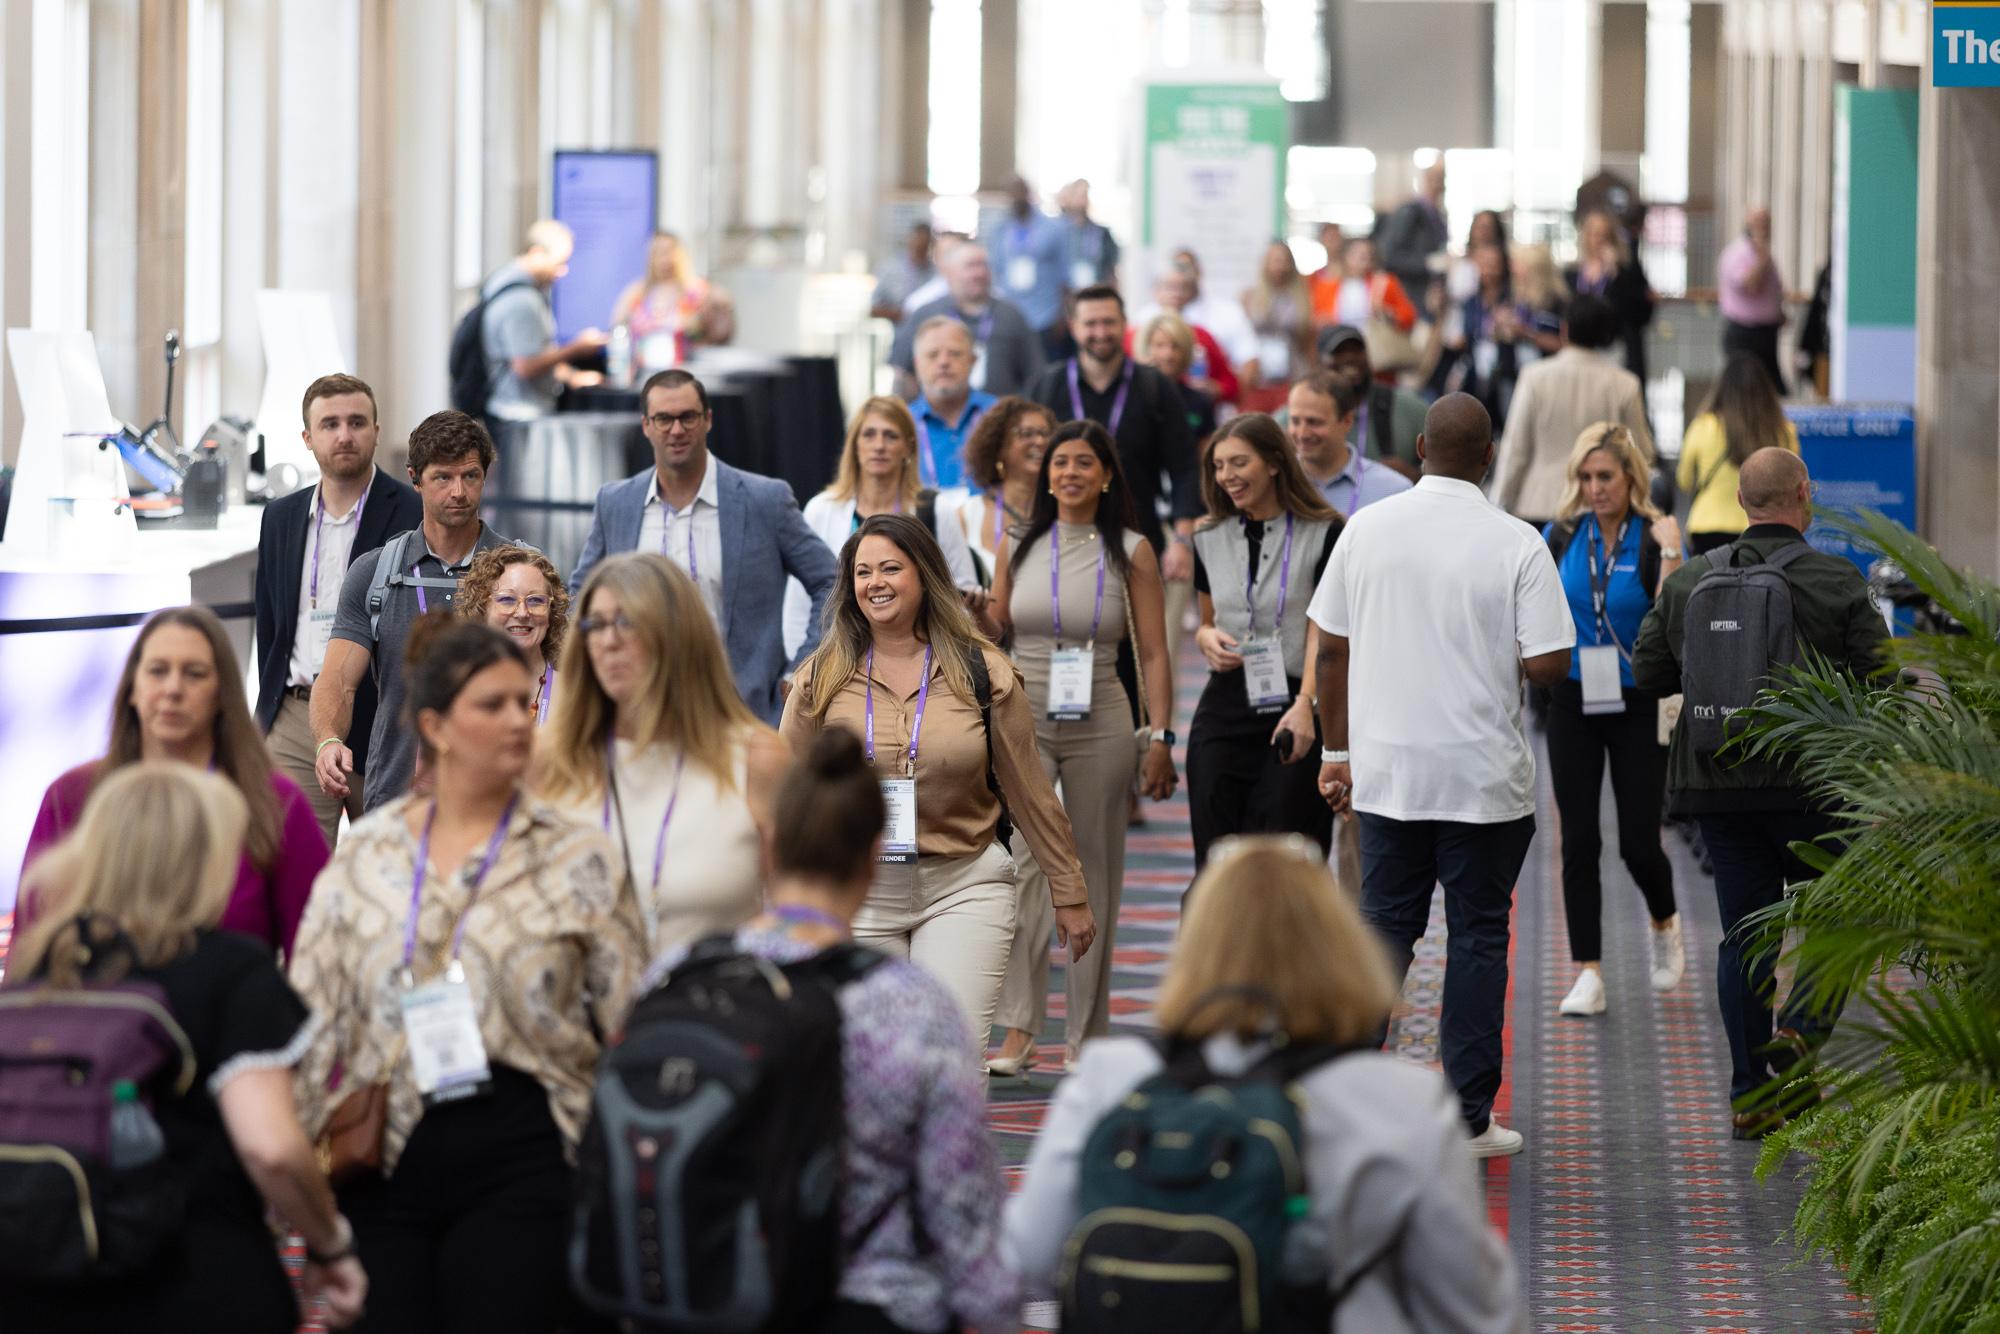 Attendees networking in the halls of Apartmentalize in between education sessions